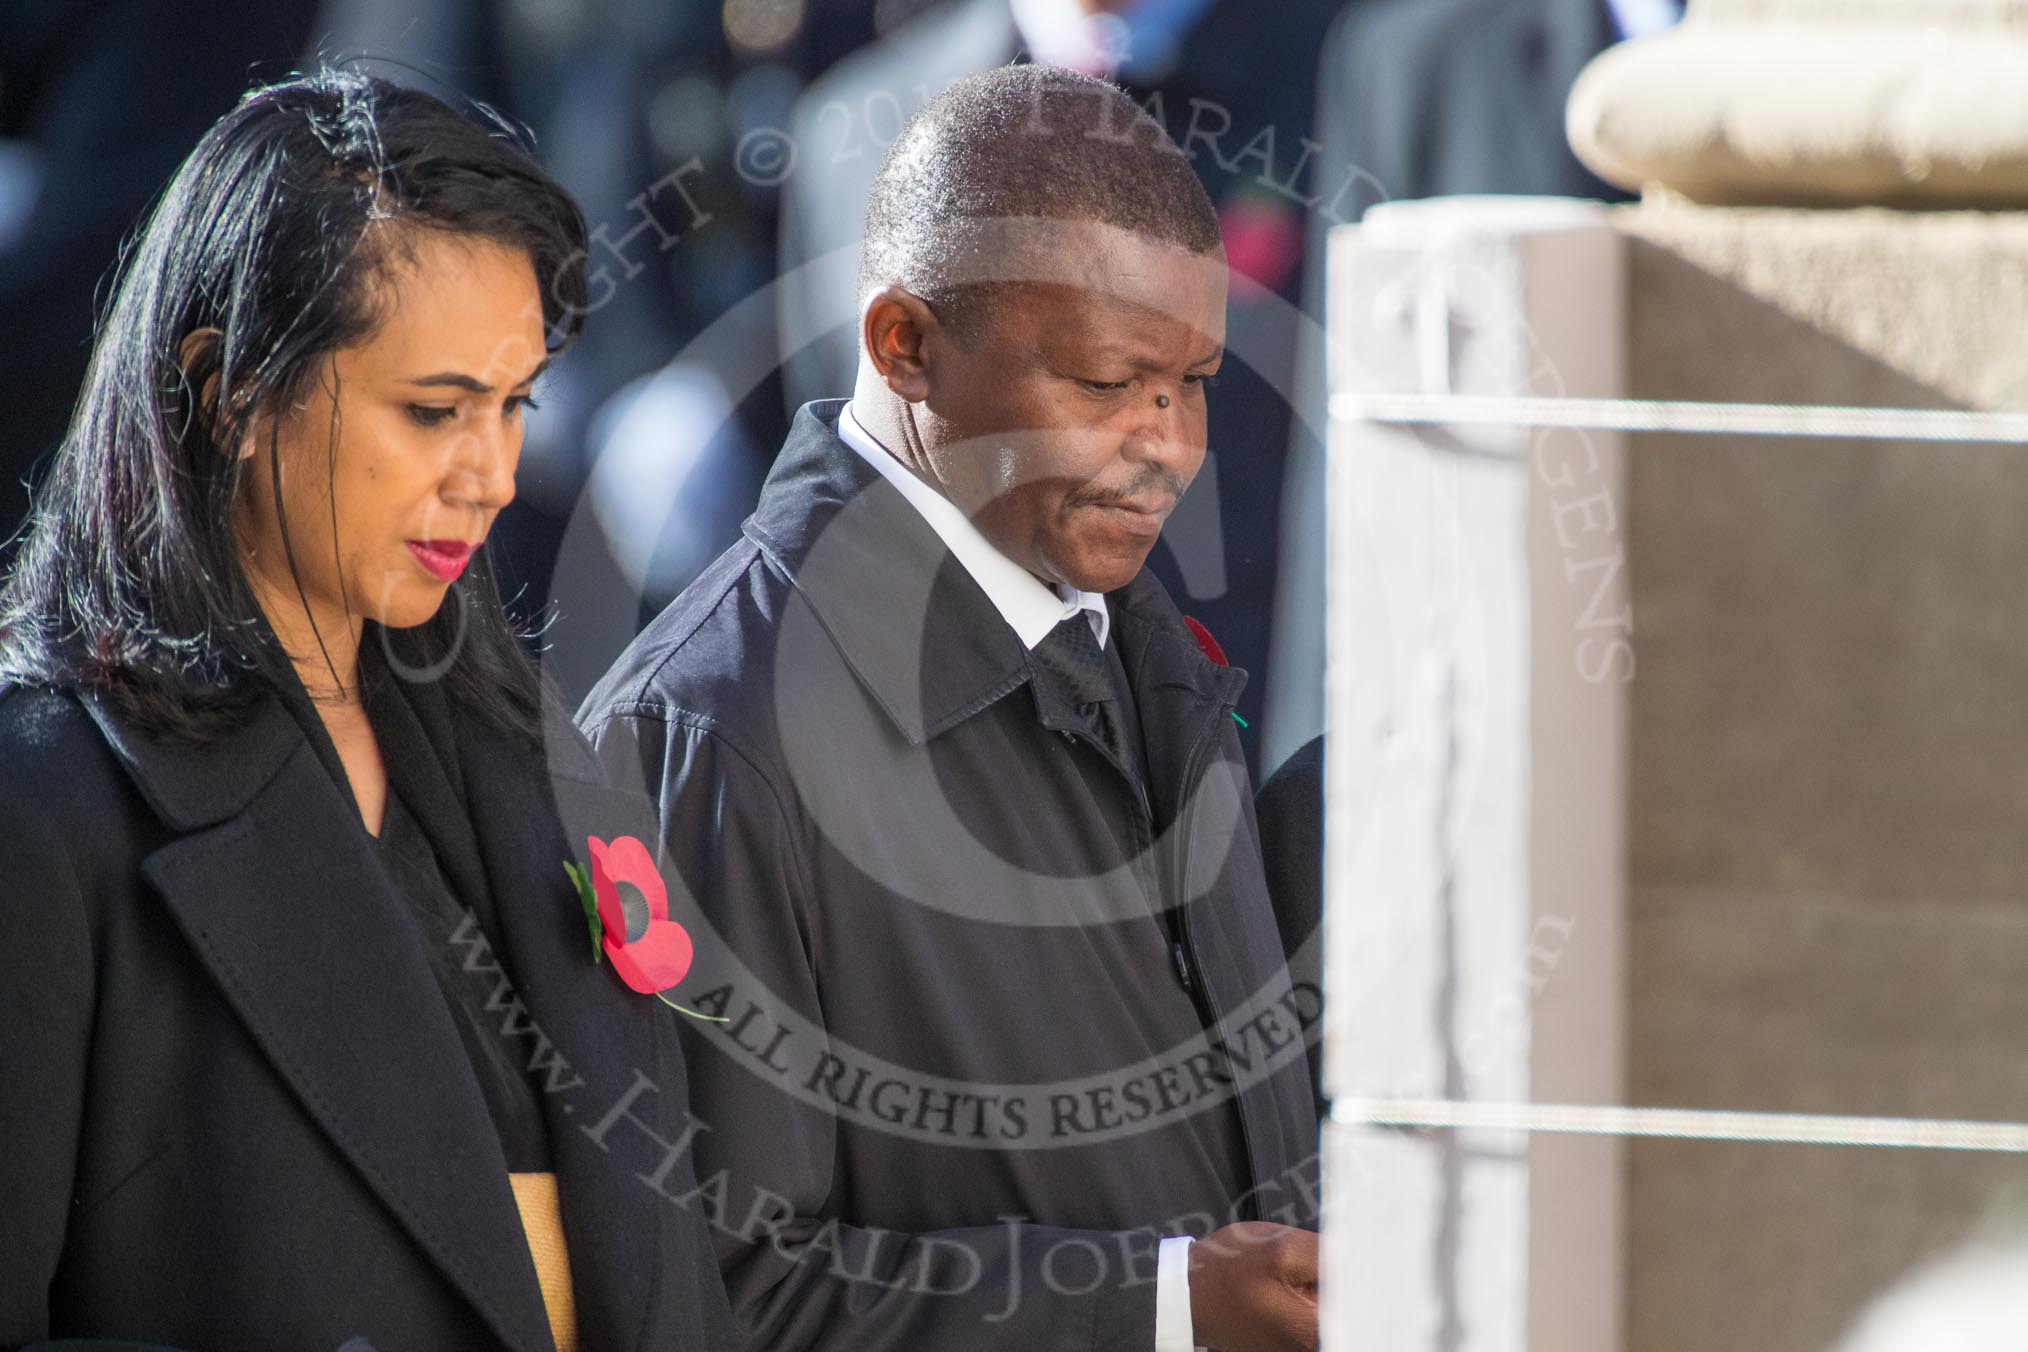 The High Commissioner of Tonga, Titilupe Fanetupouvava'u Tu'ivakano, and the  High Commissioner of Eswatini, during Remembrance Sunday Cenotaph Ceremony 2018 at Horse Guards Parade, Westminster, London, 11 November 2018, 11:14.